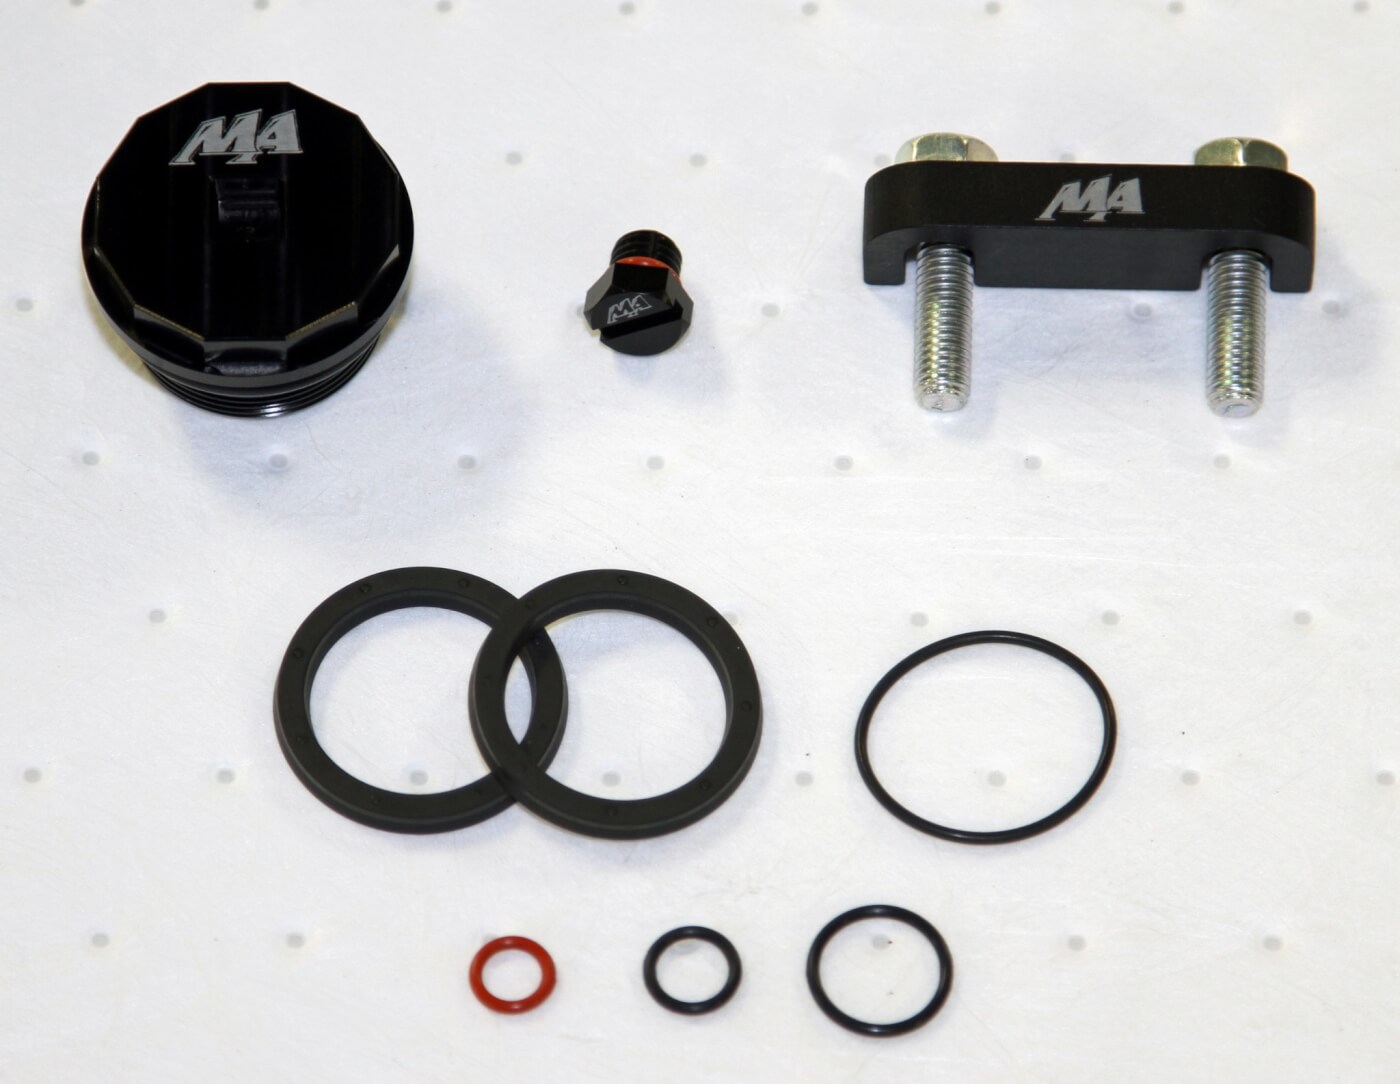 1. Merchant Automotive's Master Filter Head Kit includes everything seen here as well as a new OEM fuel filter.